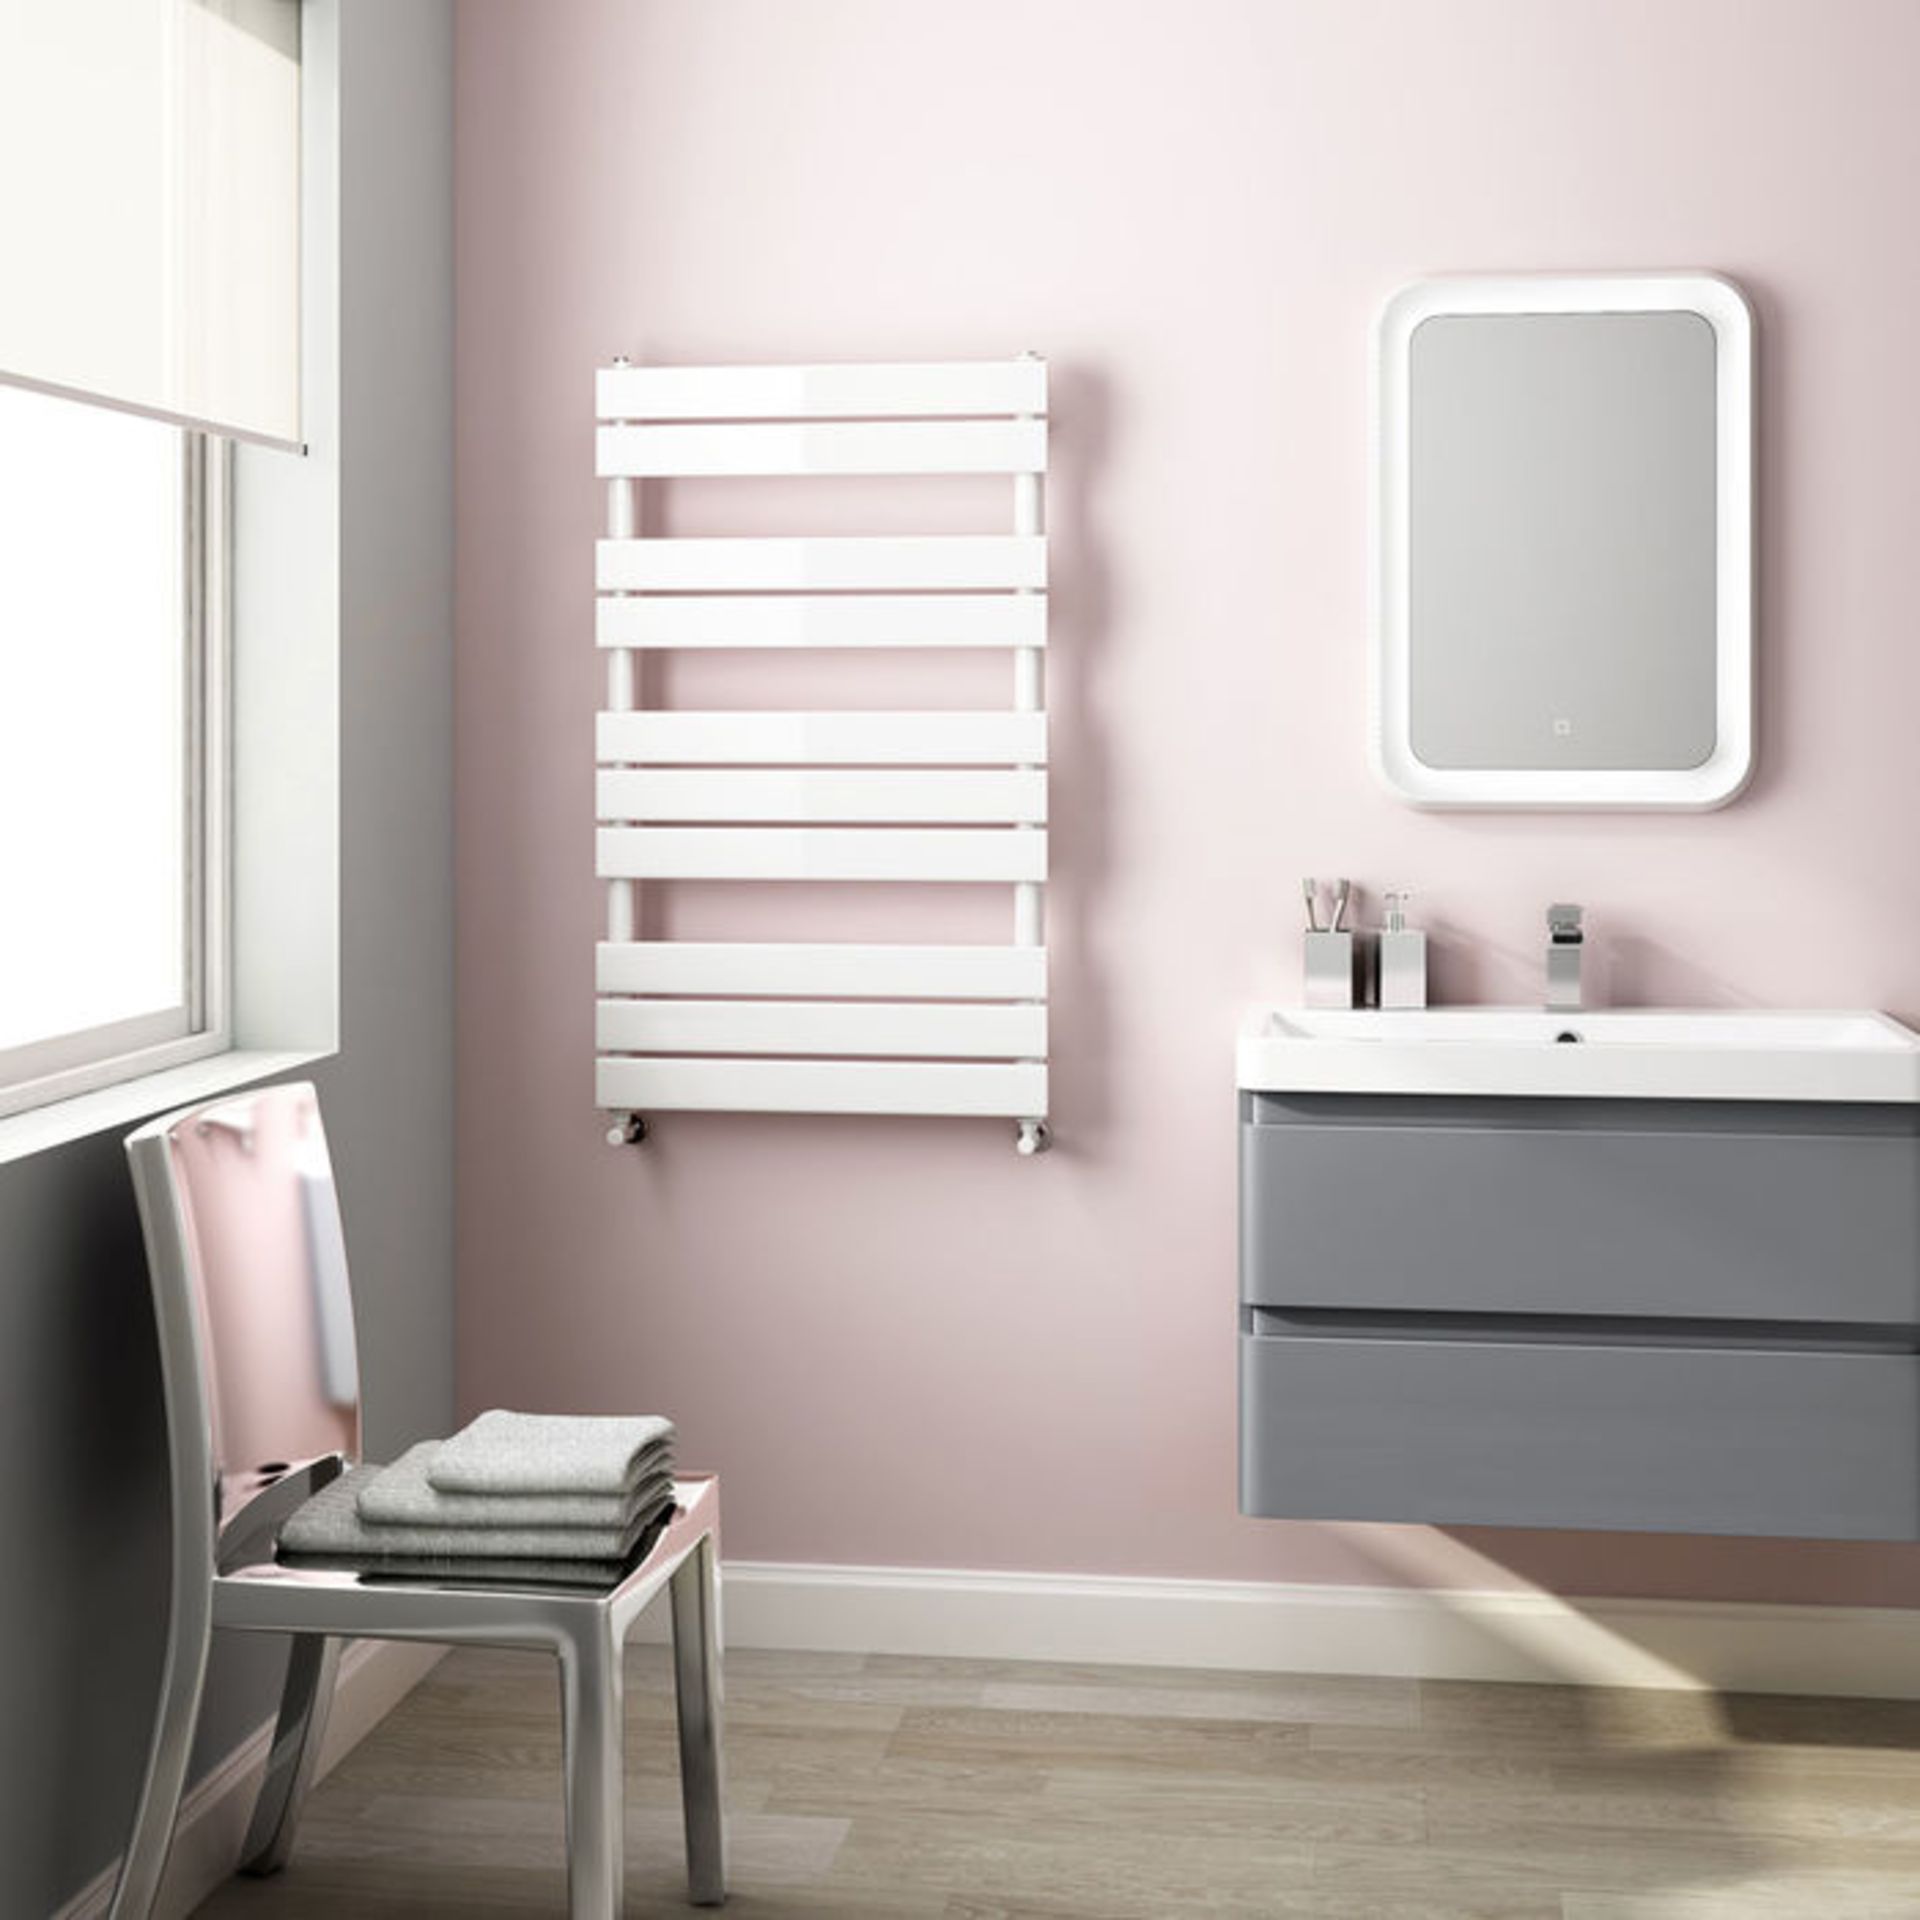 (XM26) 1000x600mm White Flat Panel Ladder Towel Radiator. RRP £267.99. Made from low carbon steel - Image 2 of 2